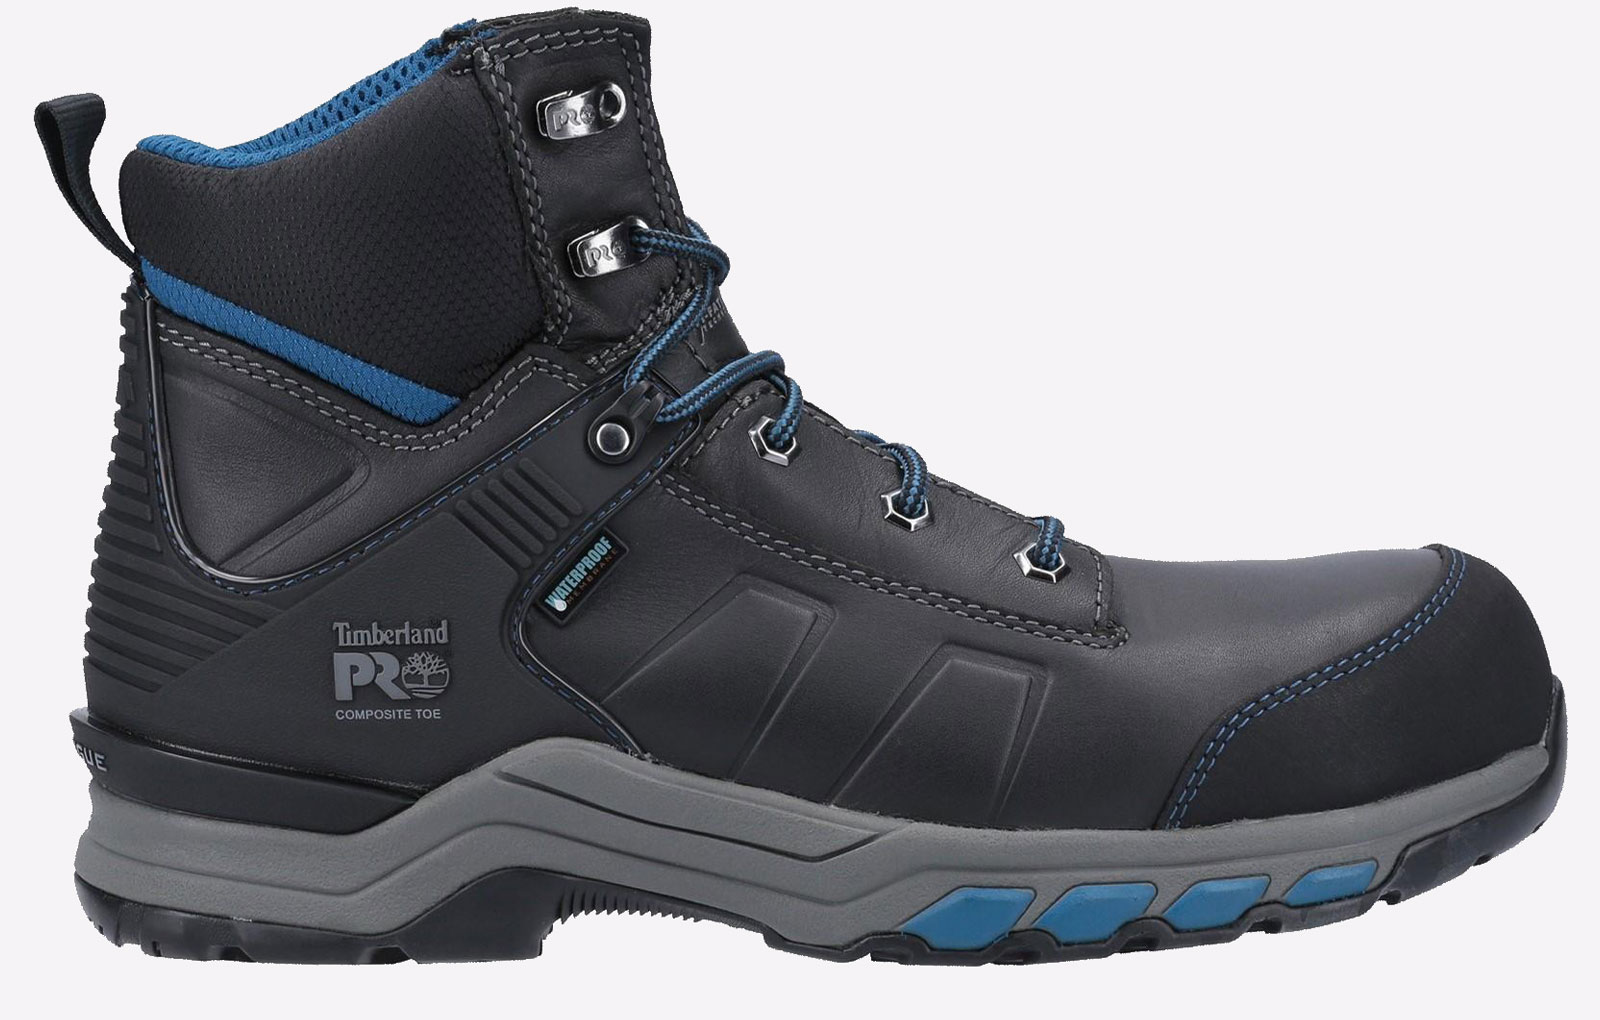 Timberland Pro Hypercharge Composite Safety Toe Work Boot Mens - GRD-30948-52785-13